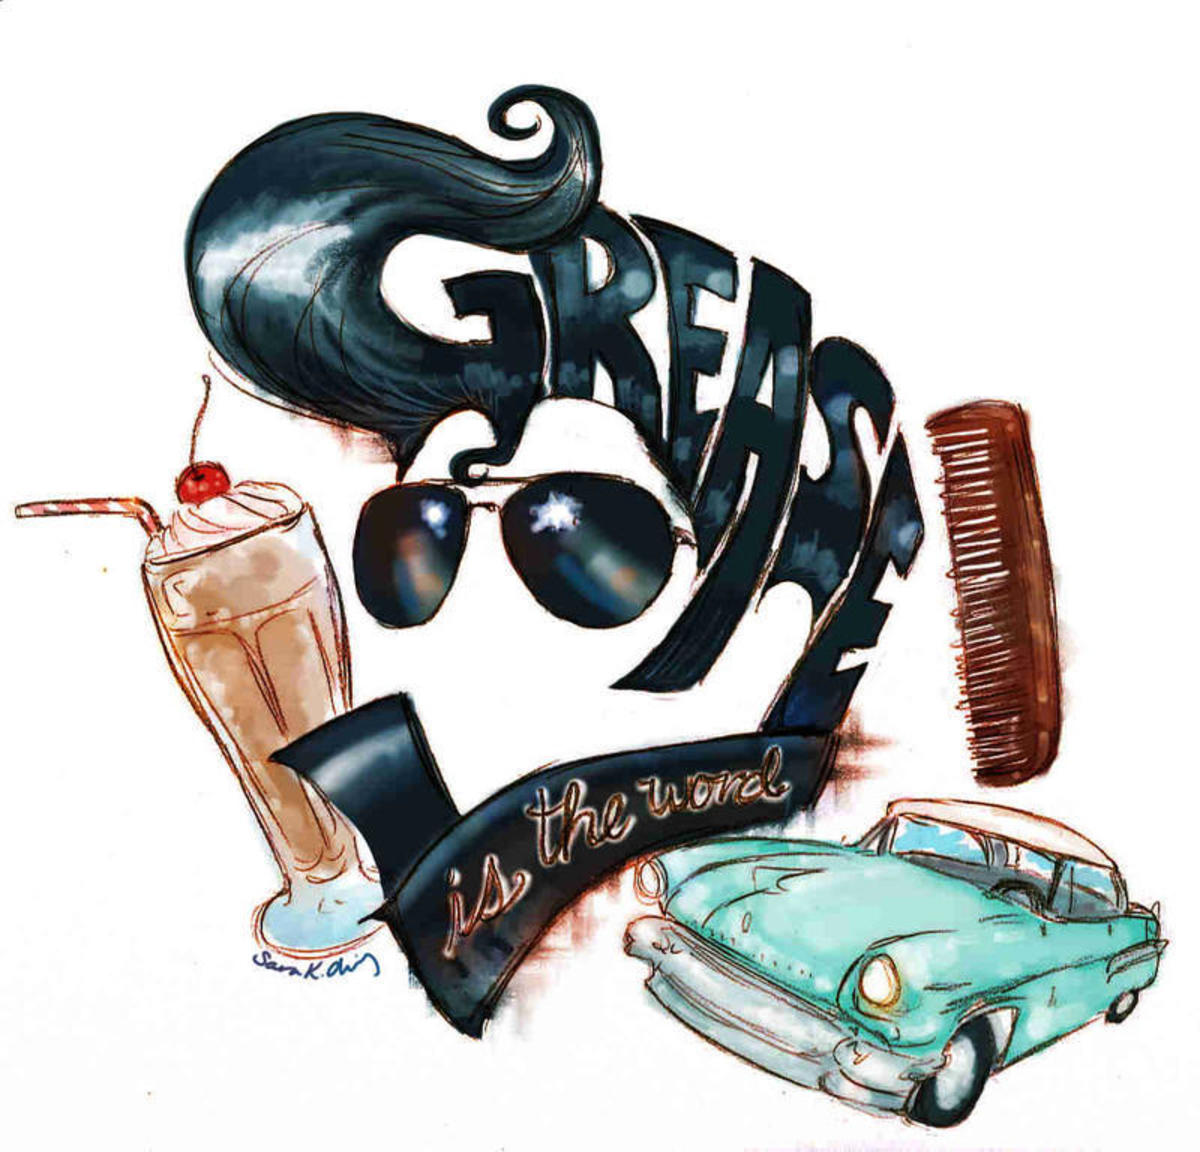 In 1978, Grease—a musical romantic comedy based on the 1971 Broadway show with the same title—was the highest-grossing film.